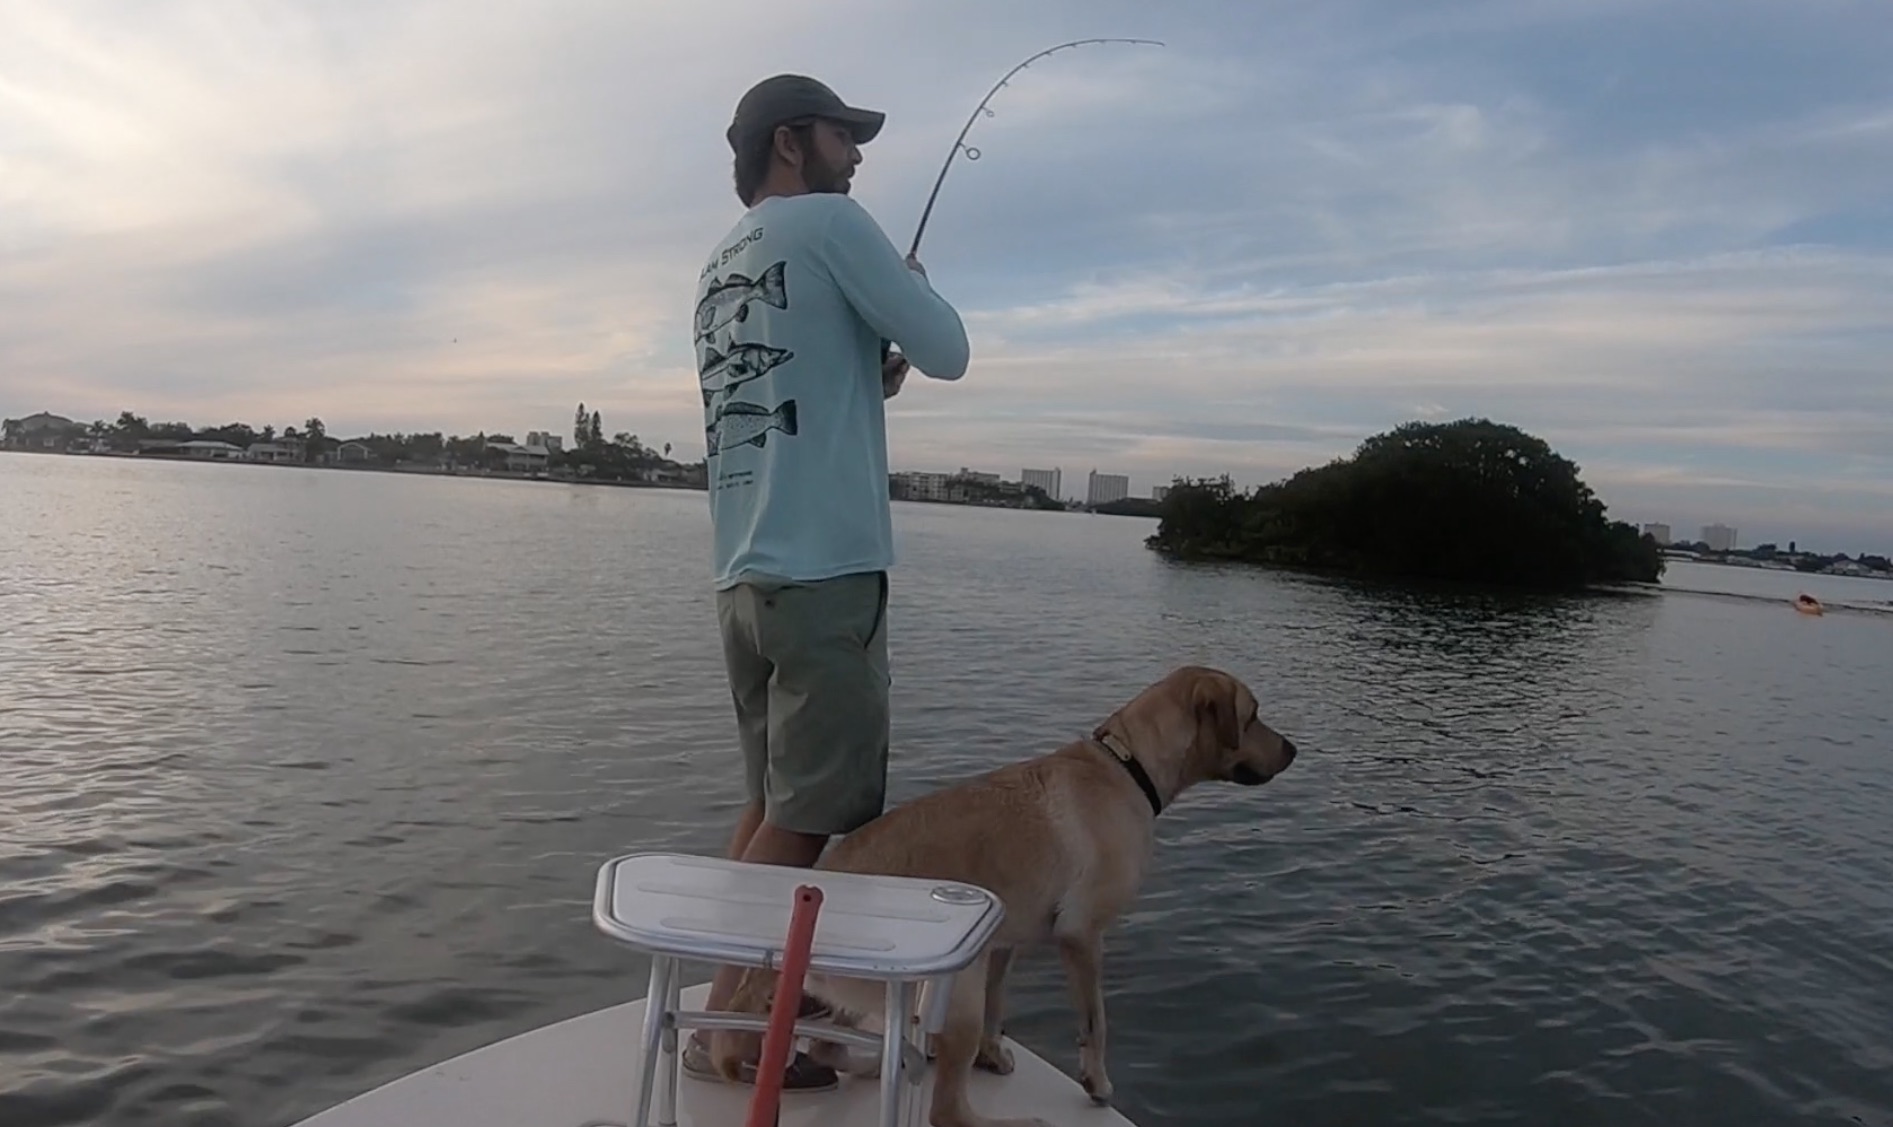 retrieving paddletail lures